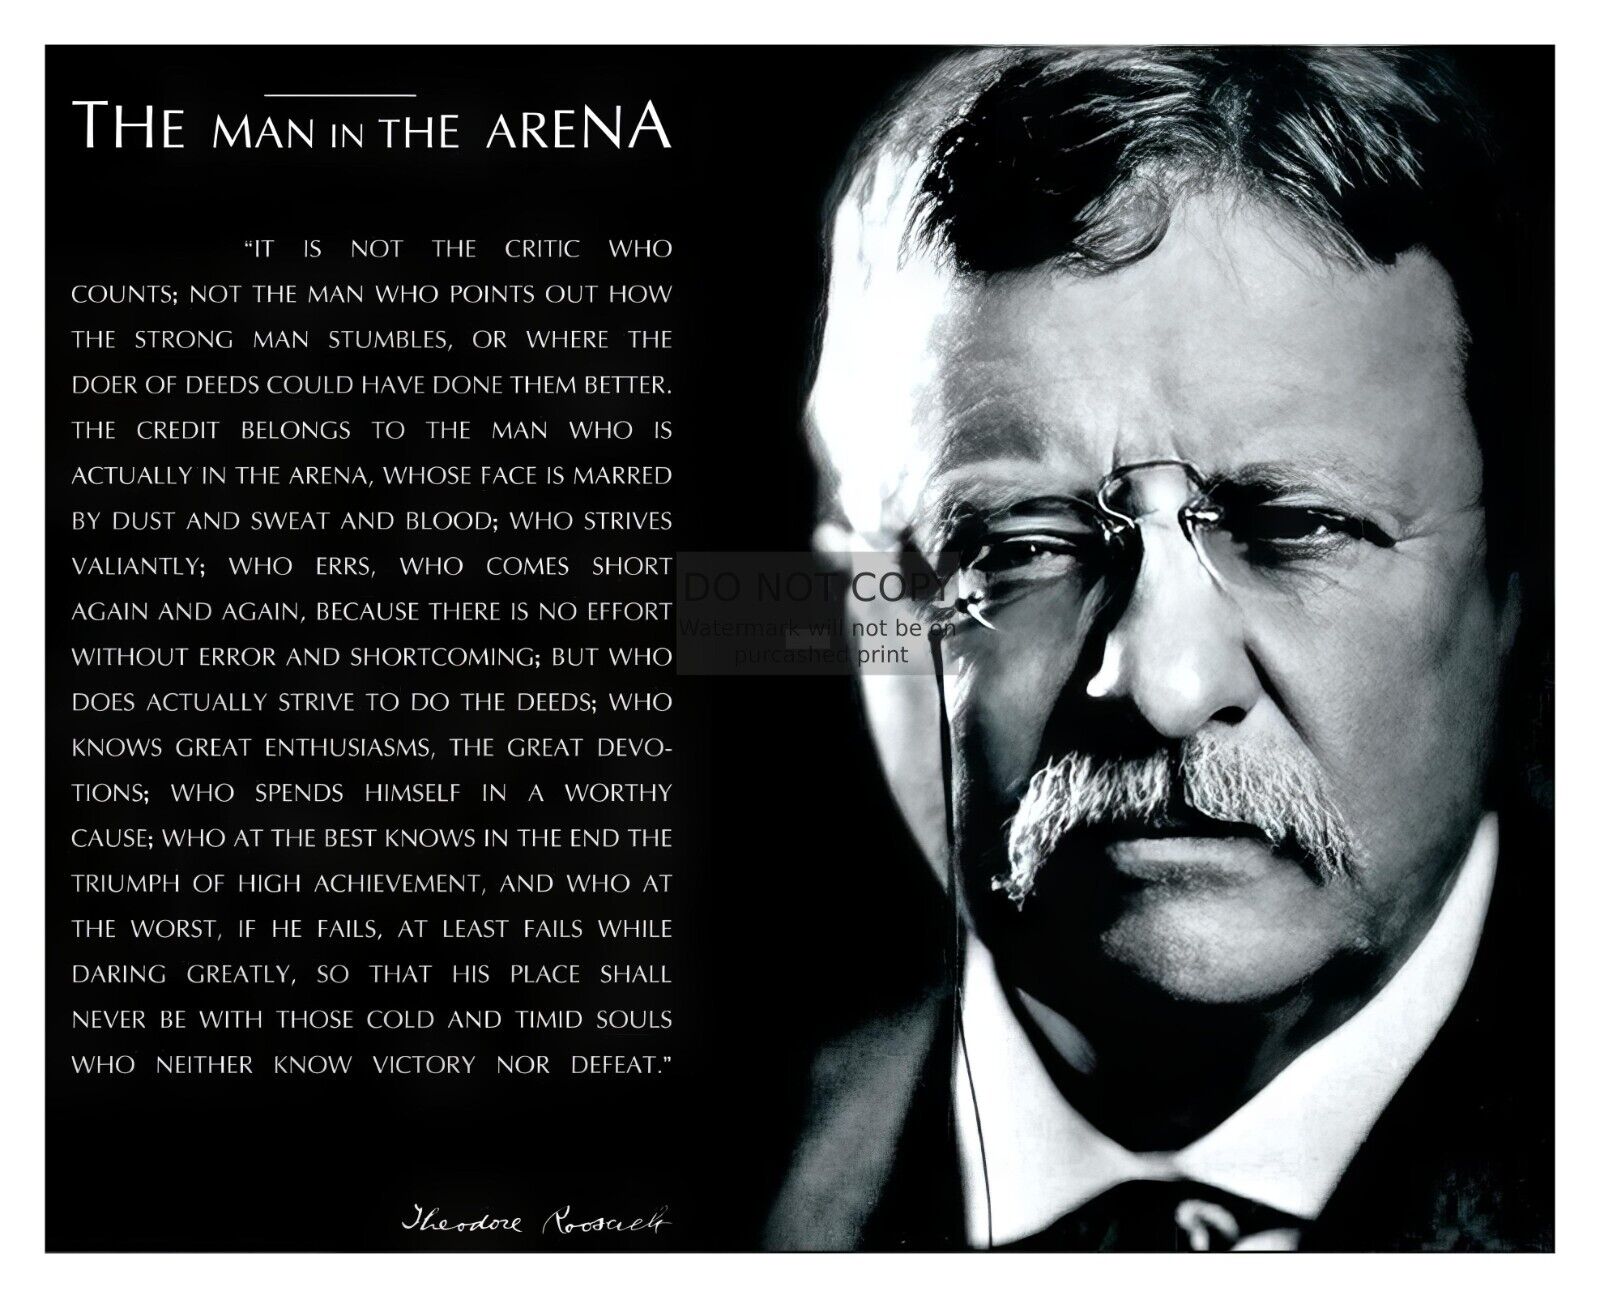 PRESIDENT THEODORE TEDDY ROOSEVELT THE MAN IN THE ARENA 8X10 PHOTO